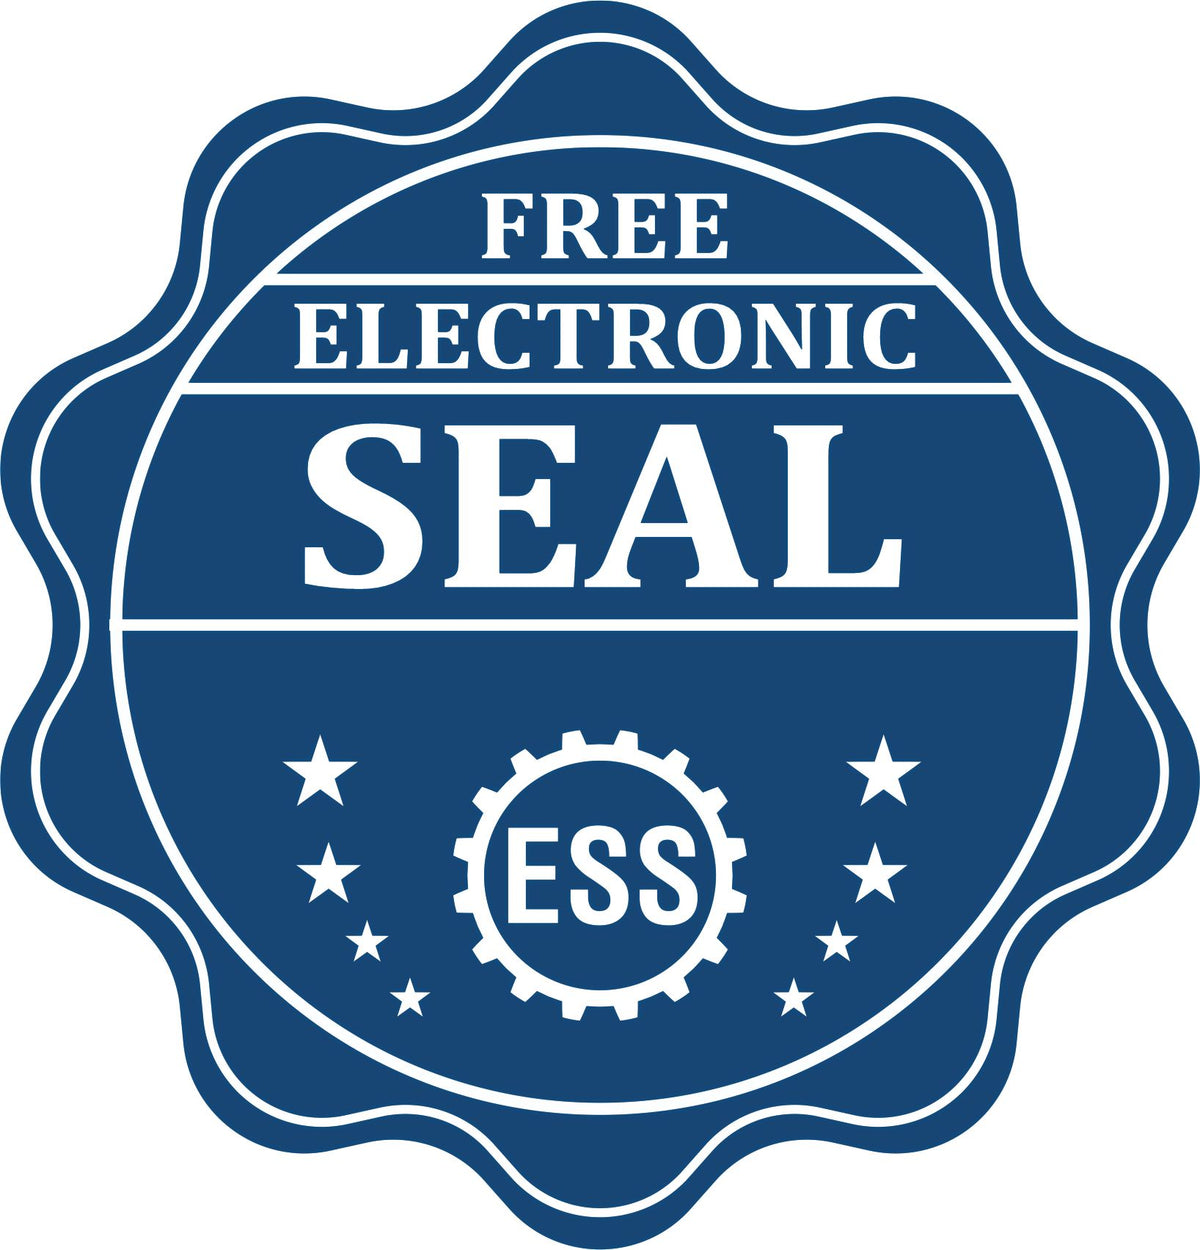 A badge showing a free electronic seal for the Gift District of Columbia Engineer Seal with stars and the ESS gear on the emblem.